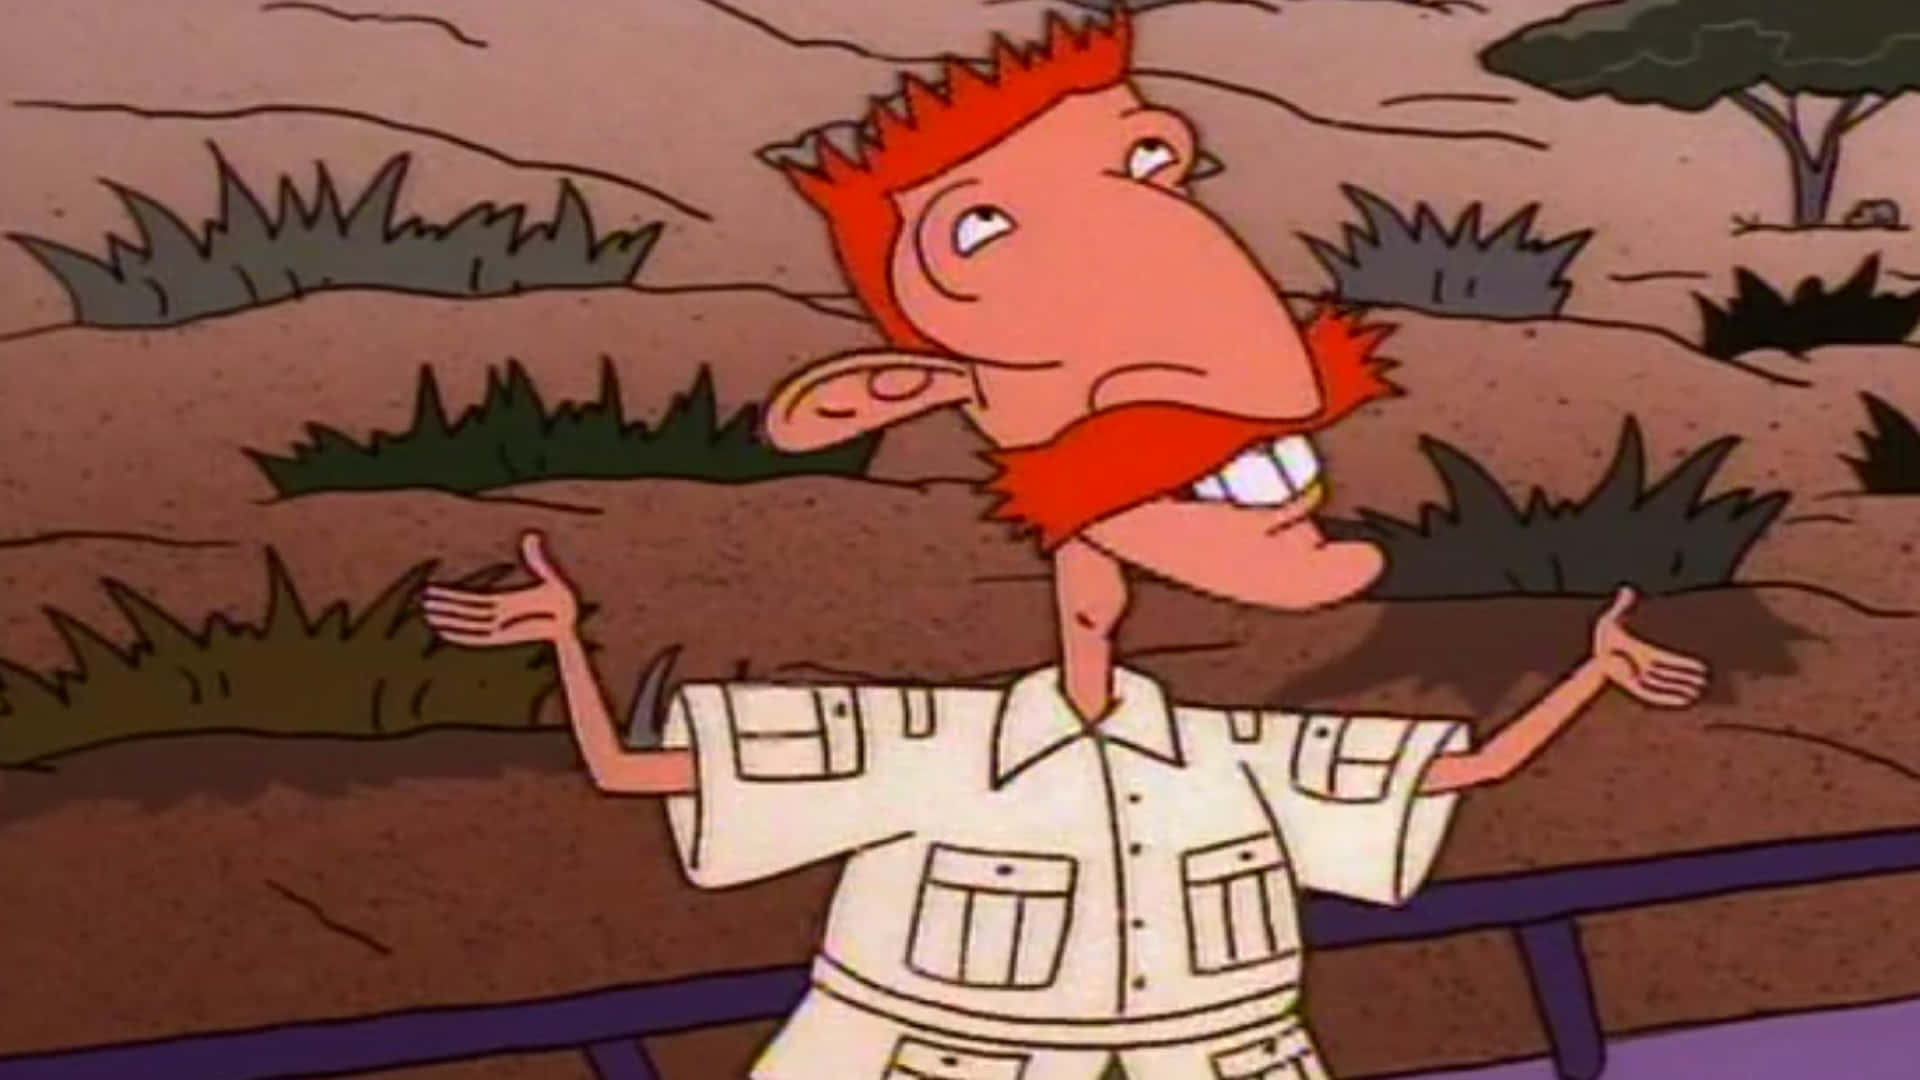 Image of Nigel Thornberry, with his gloriously large nose and pointy chin